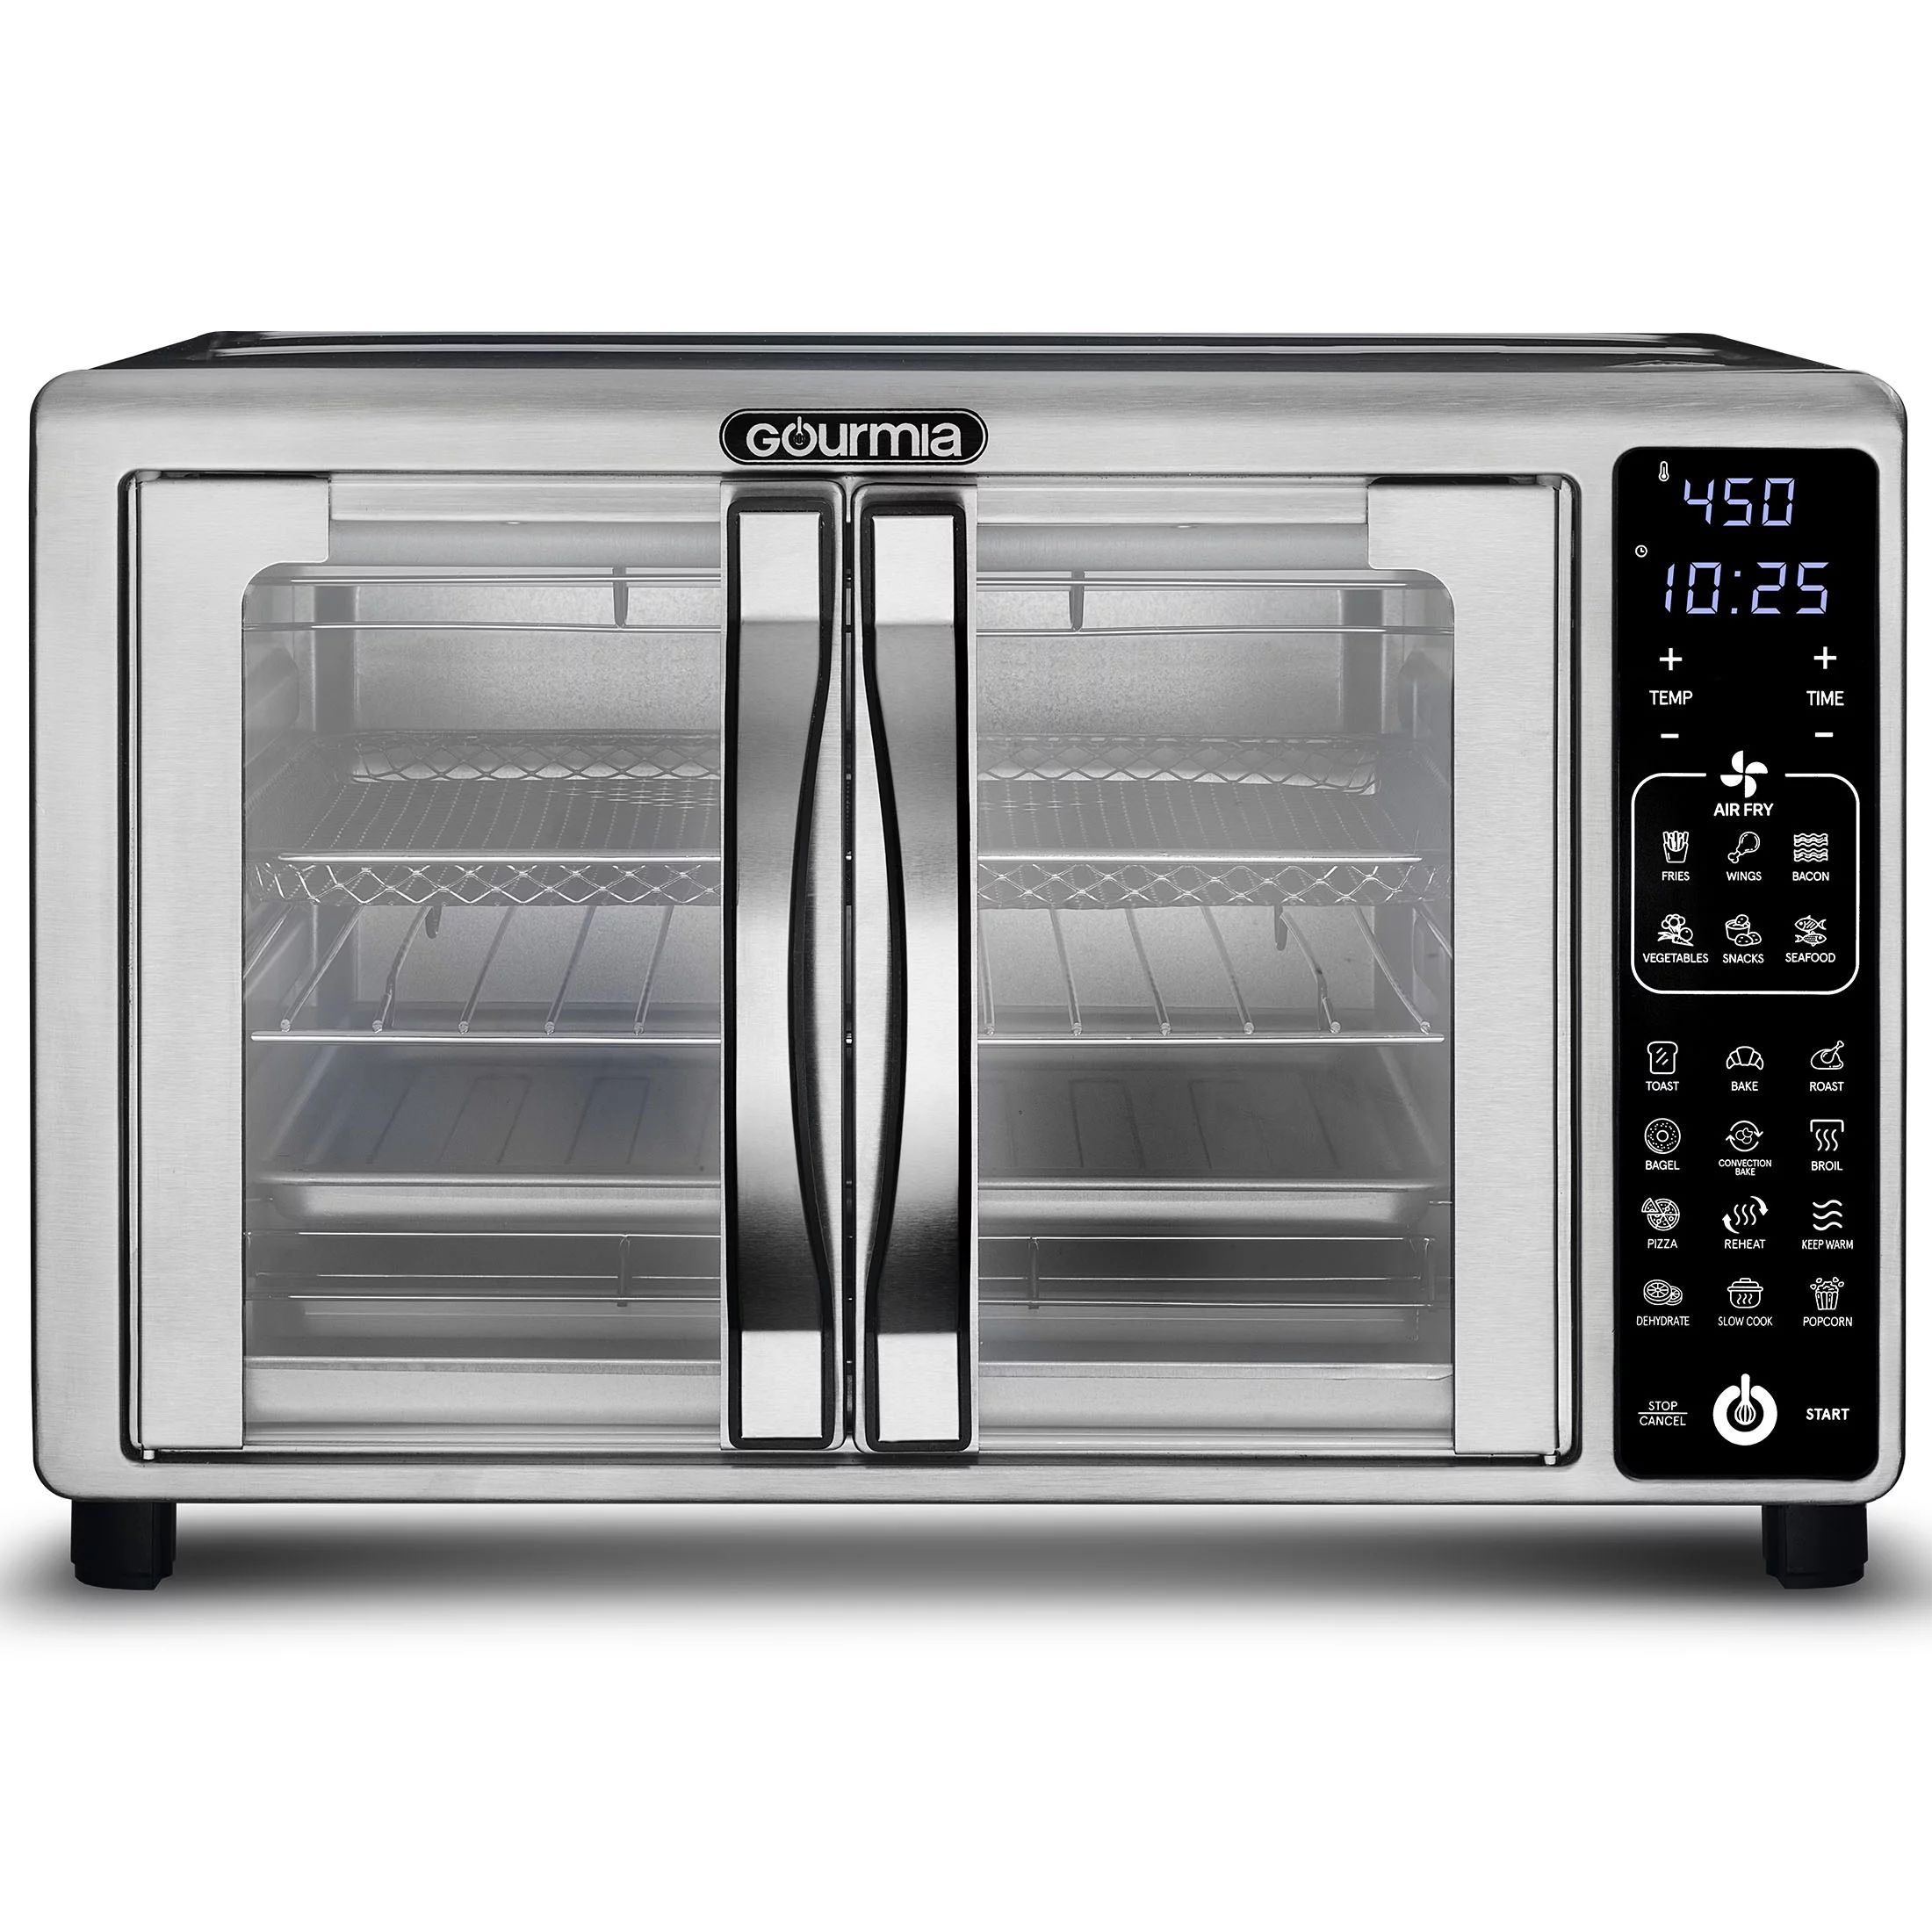 Gourmia Digital Air Fryer Toaster Oven with Single-Pull French Doors, 6 Slice, Stainless Steel | Walmart (US)